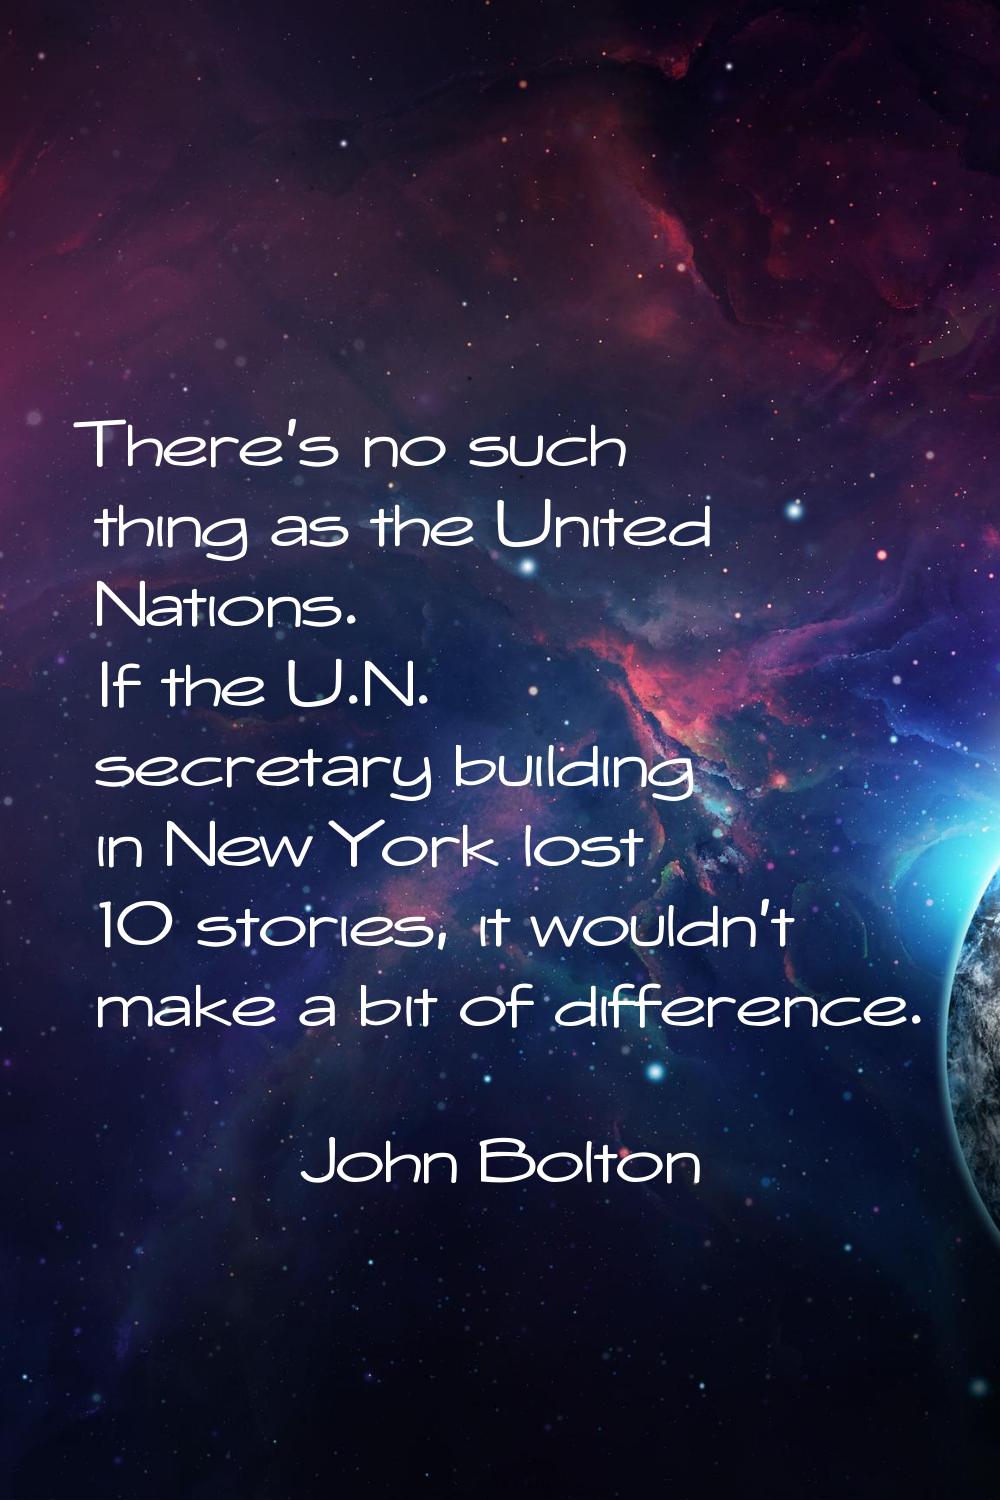 There's no such thing as the United Nations. If the U.N. secretary building in New York lost 10 sto